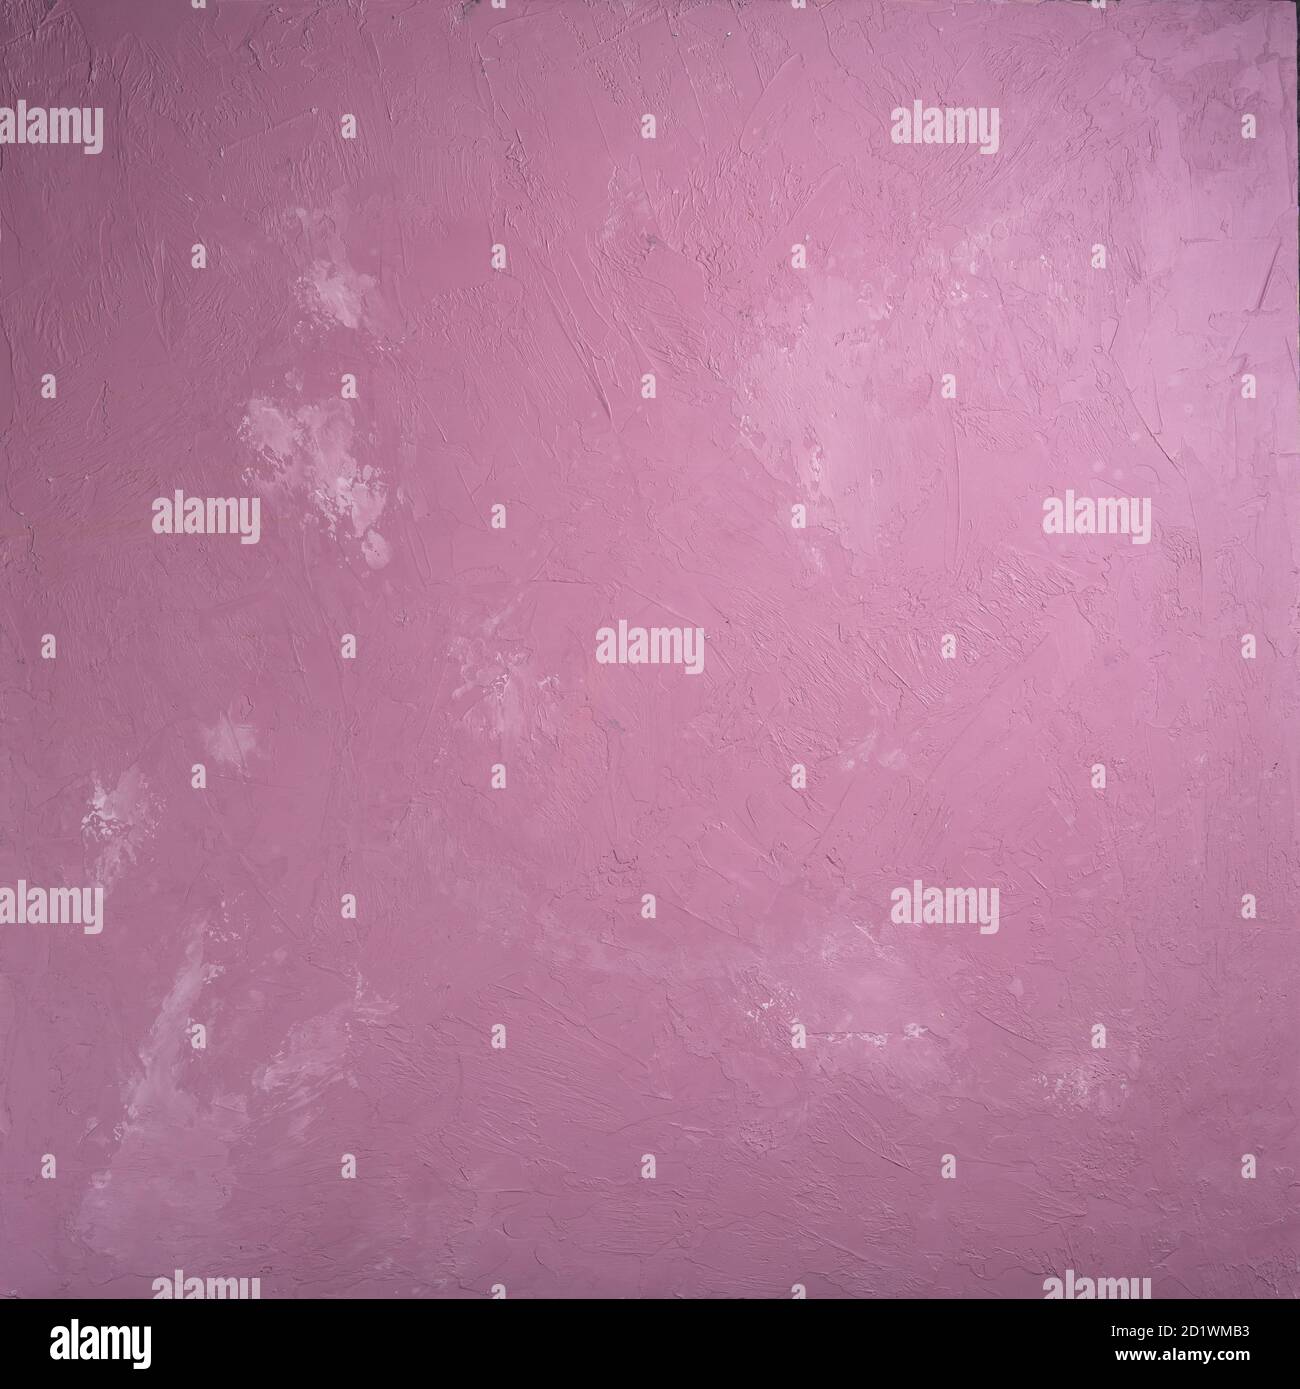 Pink wood texture background Stock Photo